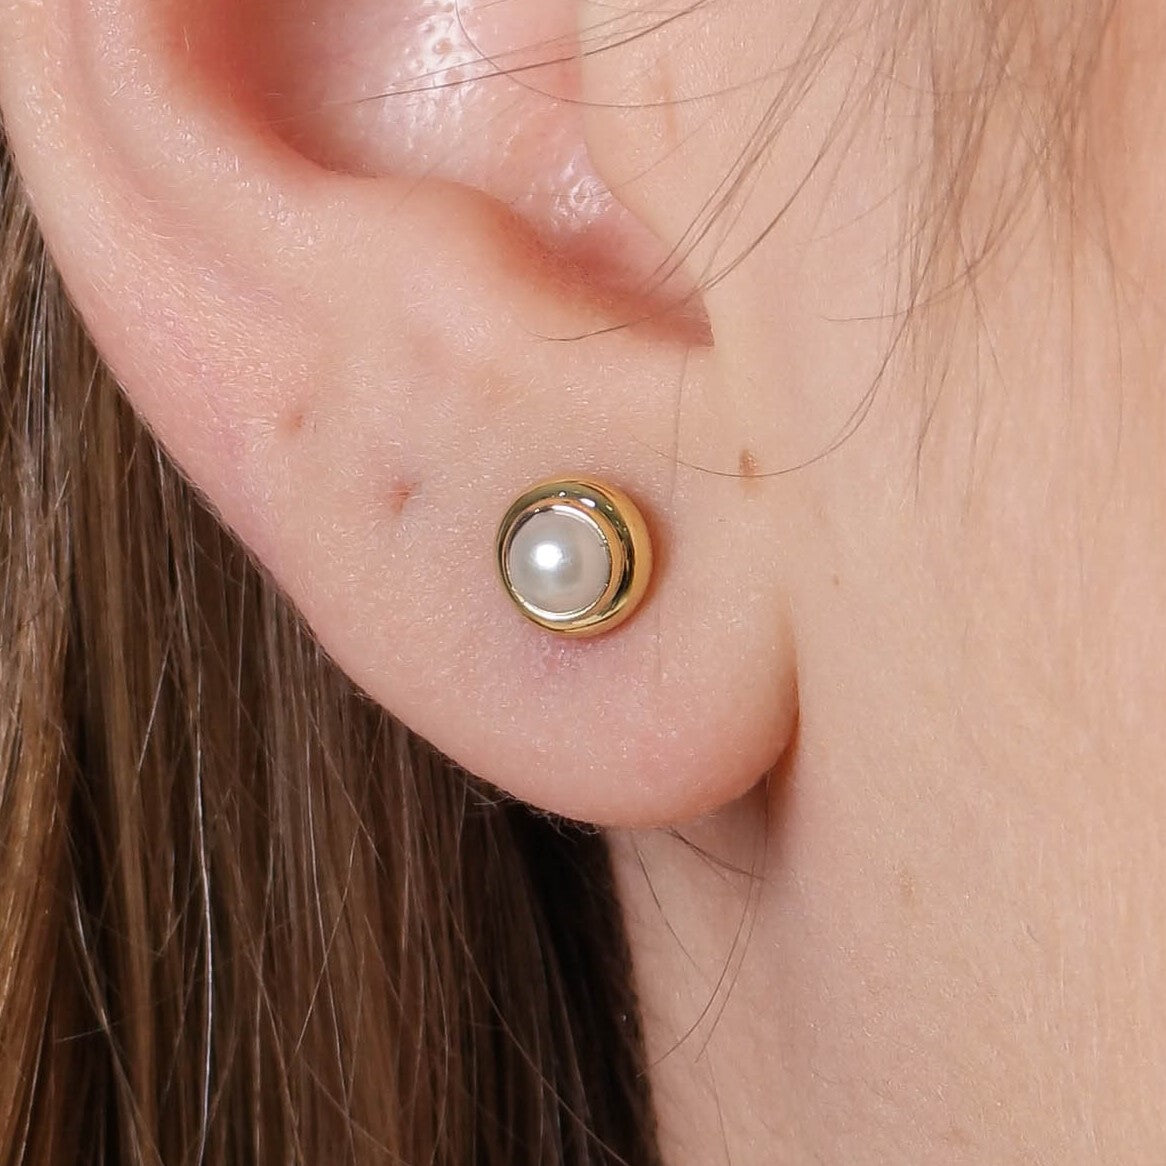 18k Gold Filled 4mm Simulated Pearl Stud Earrings